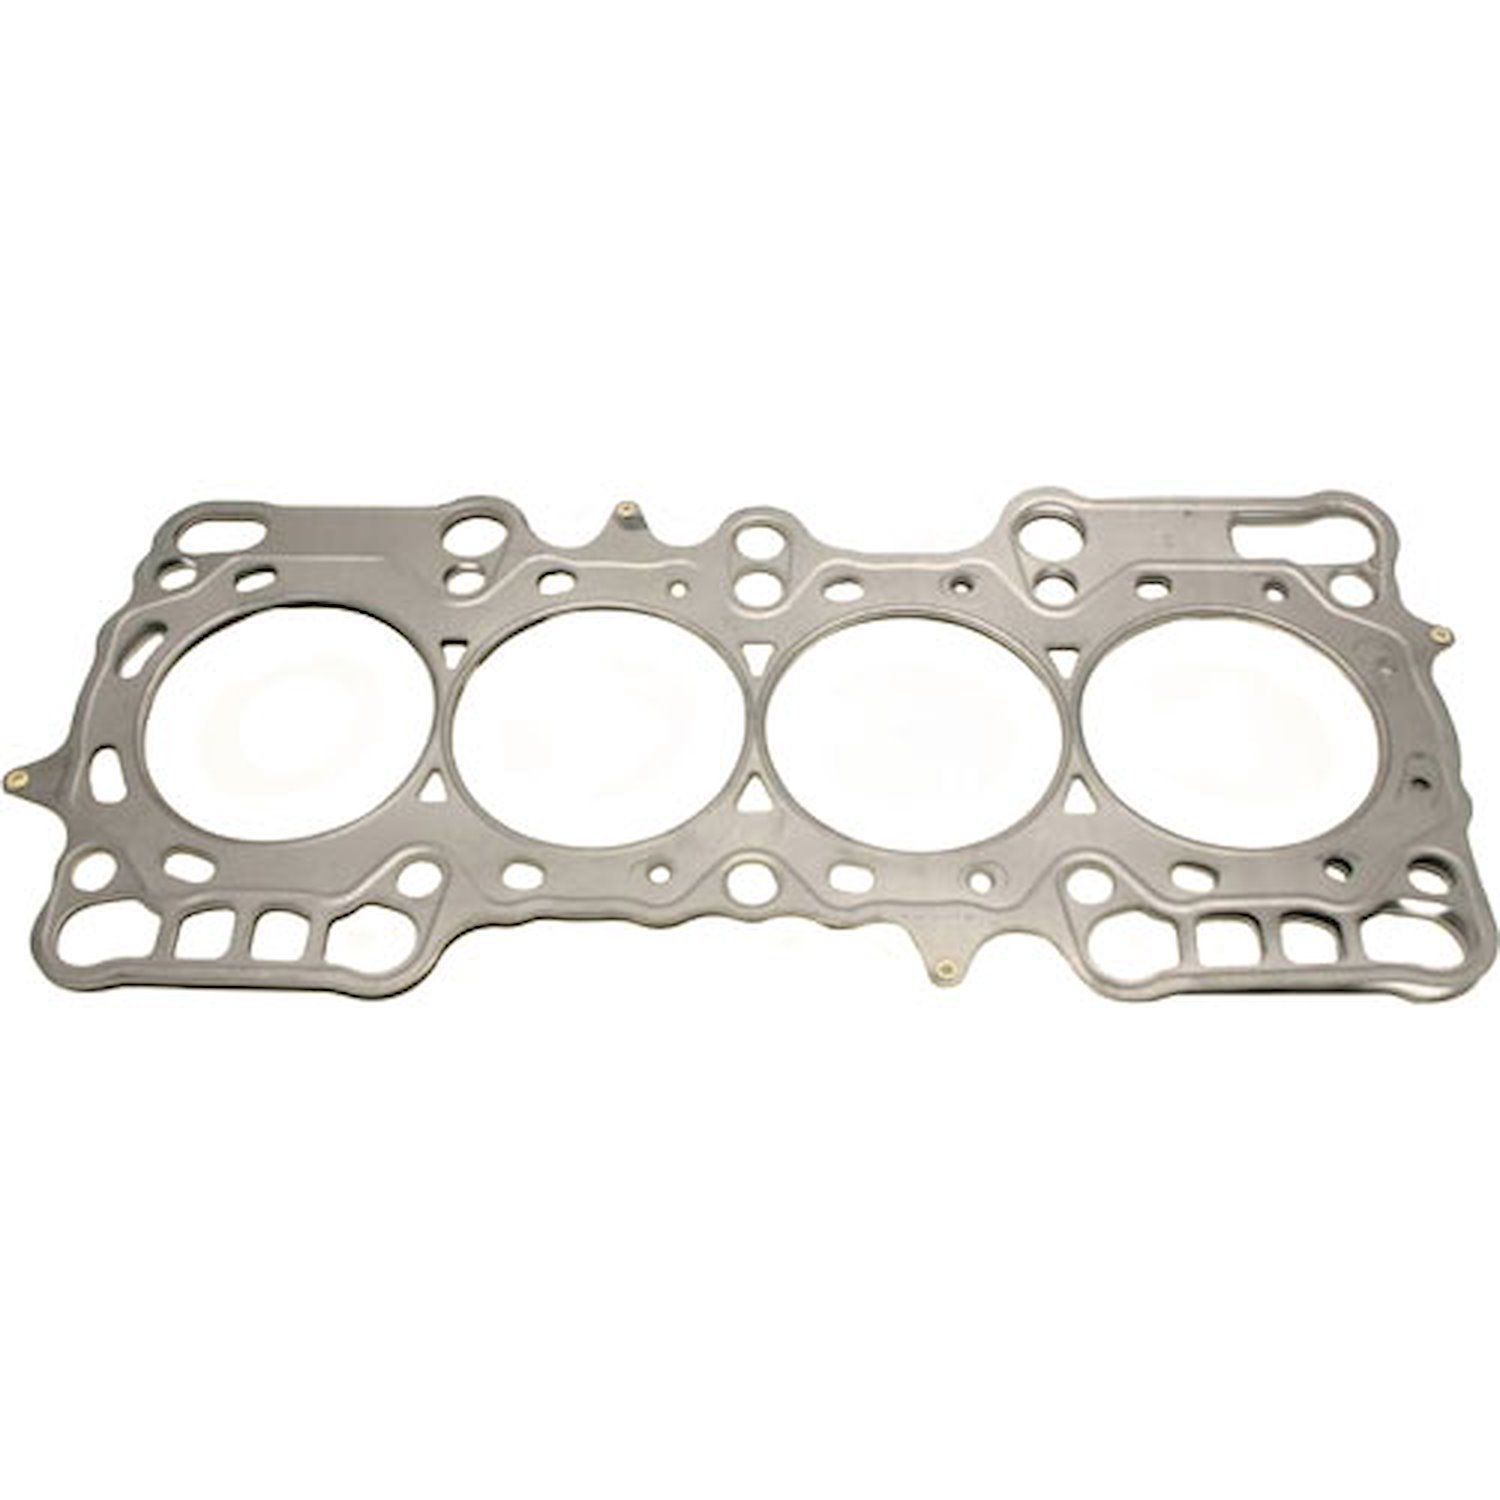 Head Gasket for 1993-1996 Honda Prelude with H22A1, H22A2 Engines [0.045 in.]